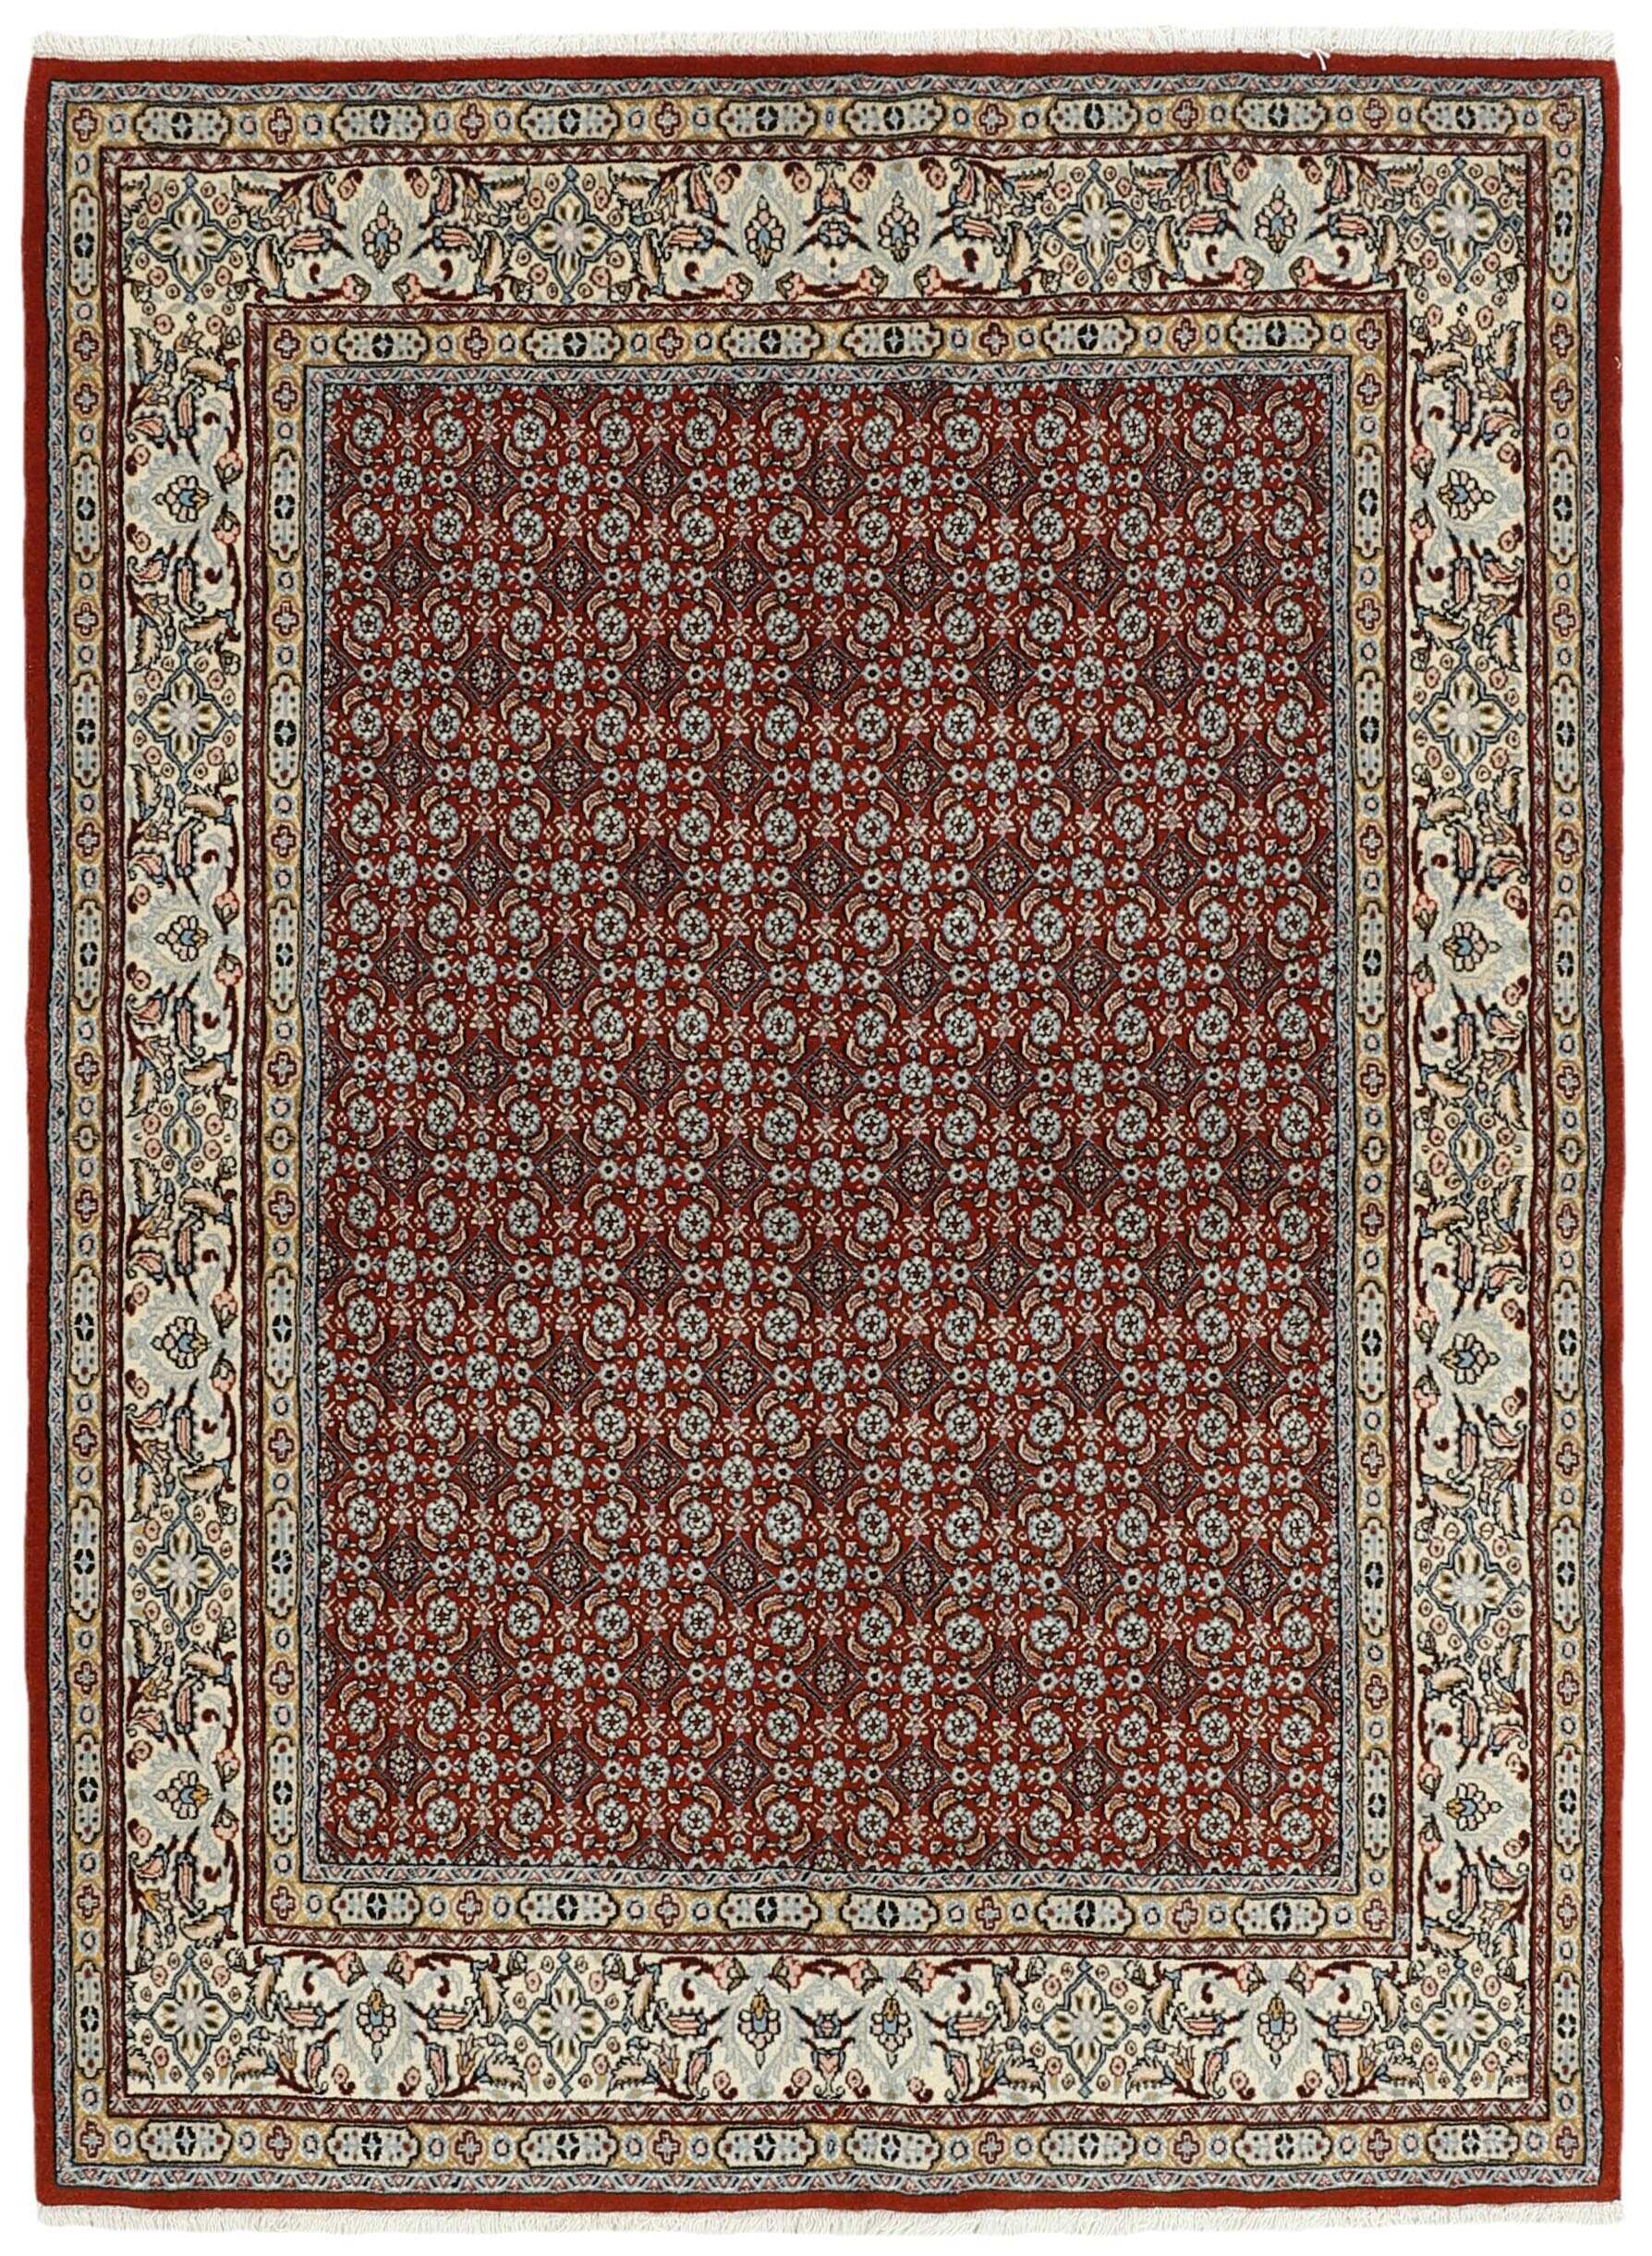 authentic persian rug with traditional floral pattern in red, blue and beige